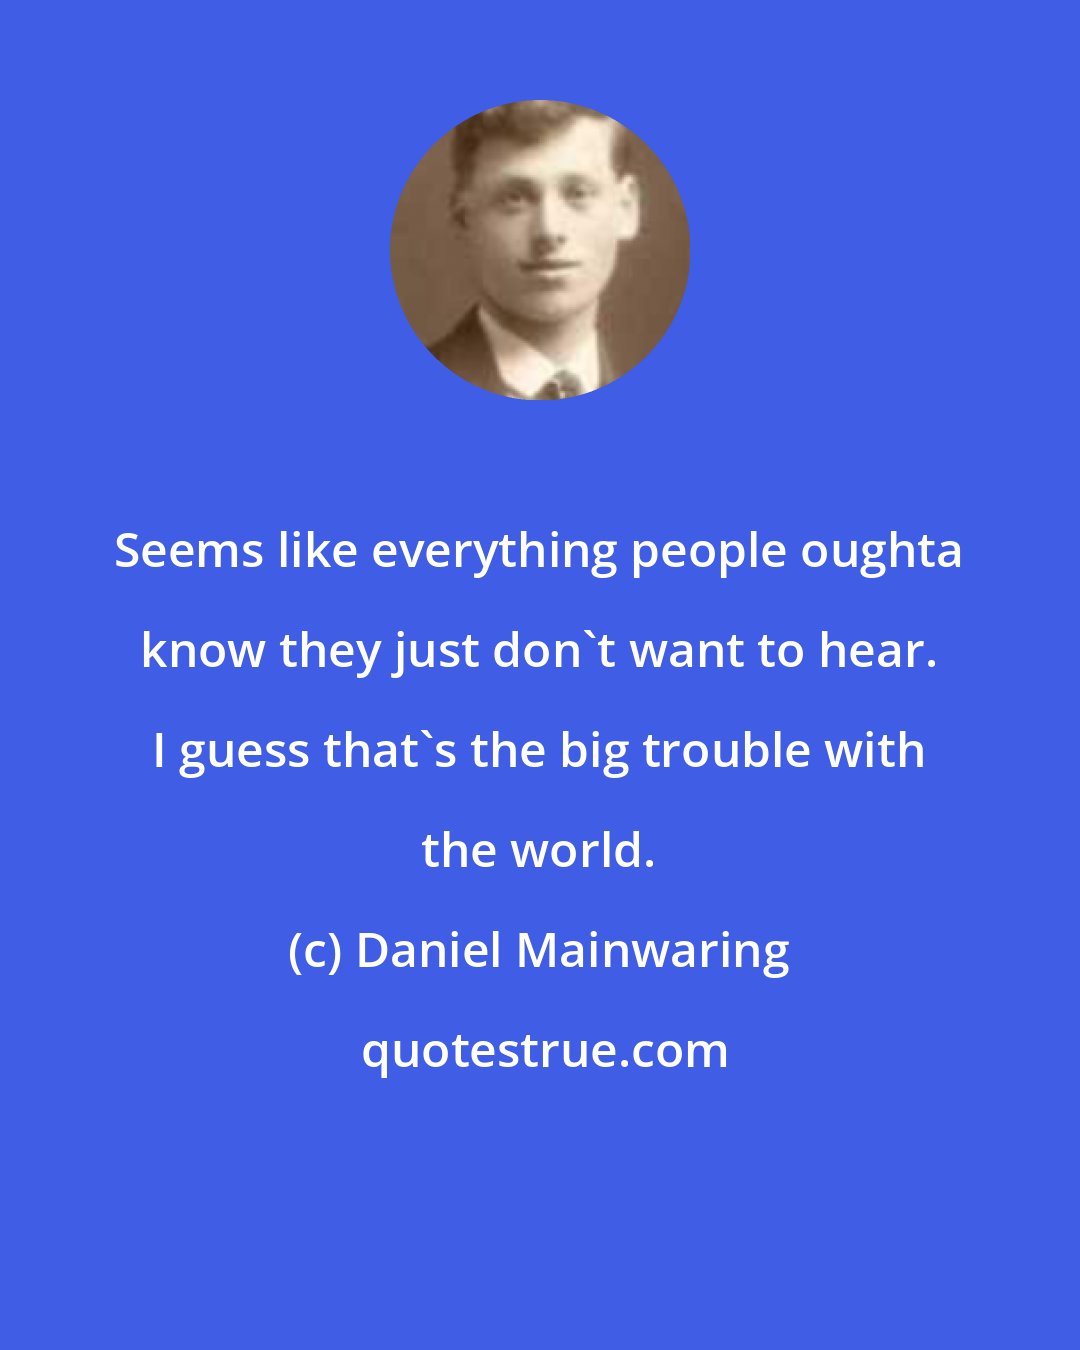 Daniel Mainwaring: Seems like everything people oughta know they just don't want to hear. I guess that's the big trouble with the world.